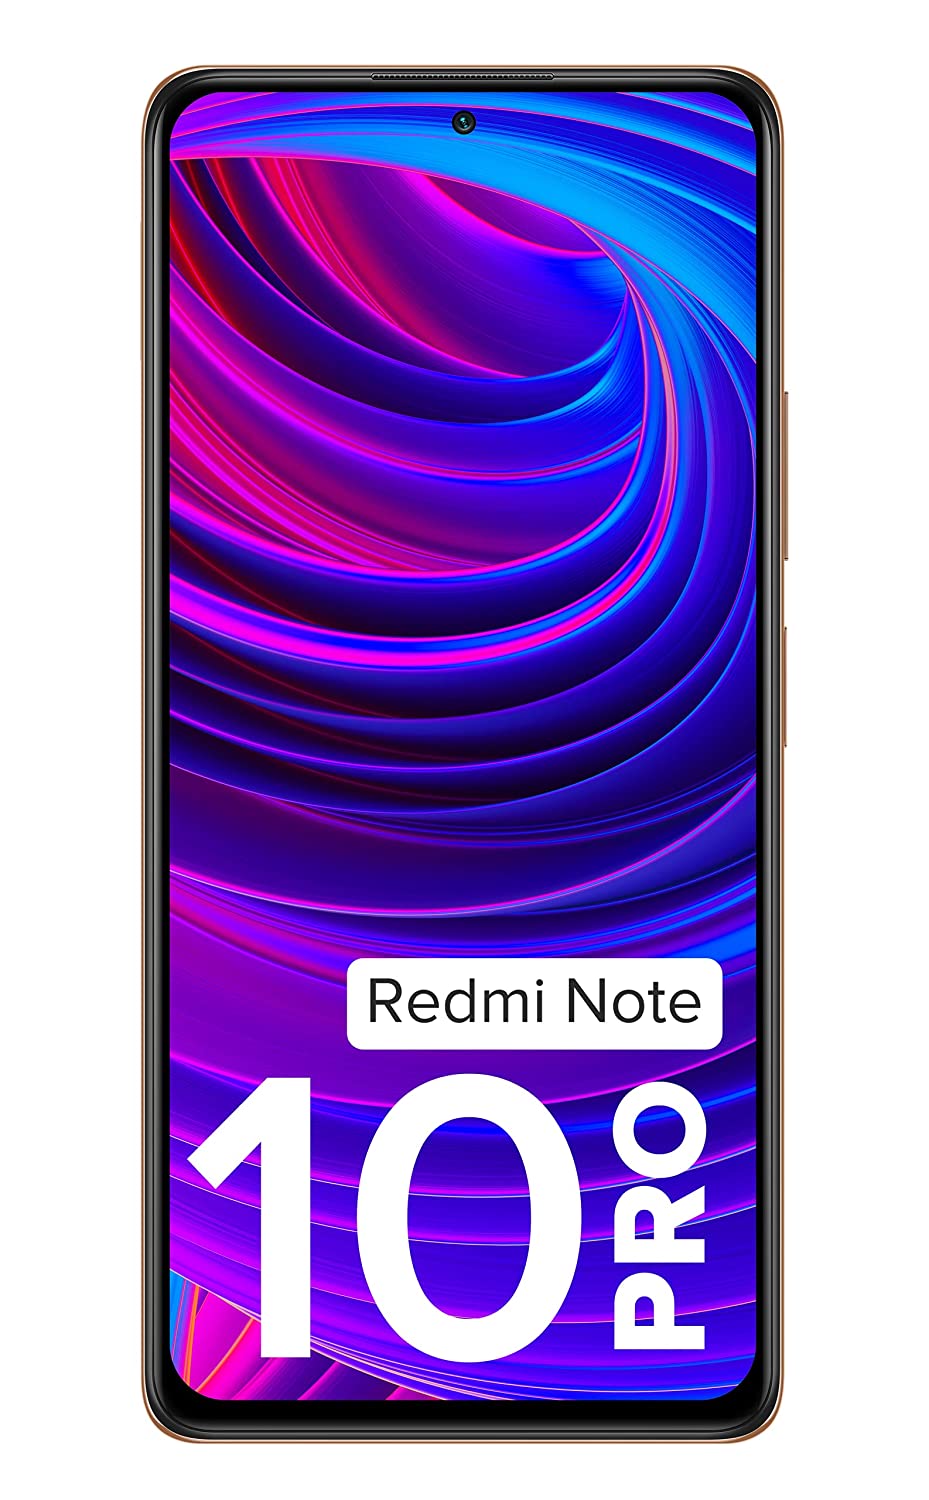 Redmi Note 10 Pro 120Hz Super Amoled Display | 64MP Camera with 5MP Super Tele-Macro | 33W Charger Included